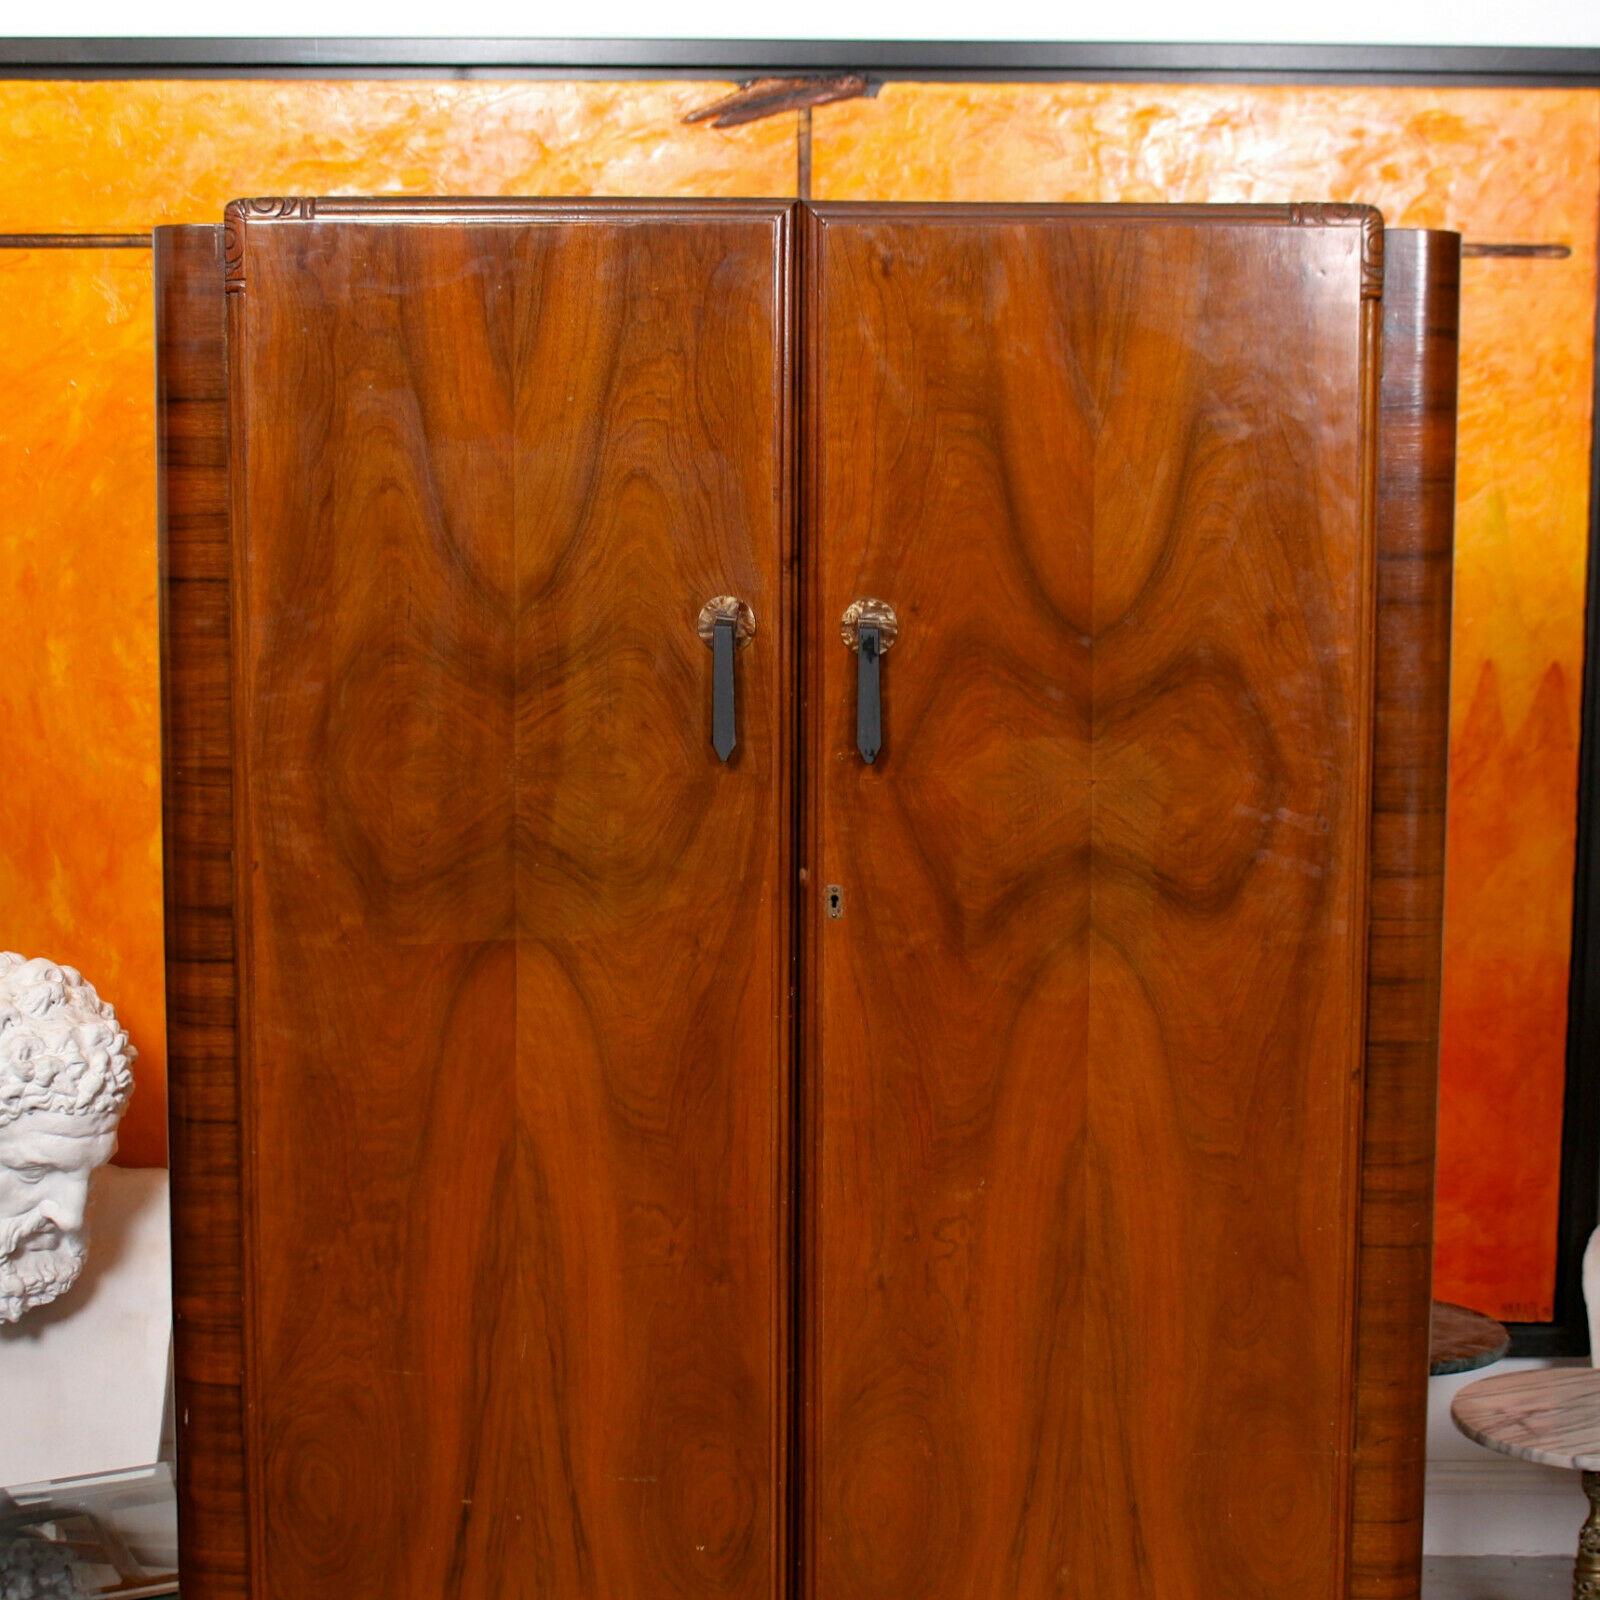 An impressive Art Deco walnut wardrobe.

The doors with inlaid marquetry panels, mounted with good ebonized handles, flanked by rounded marquetry sides and plinth base and enclosed a camphor lined interior with shelving, mirror and two hanging